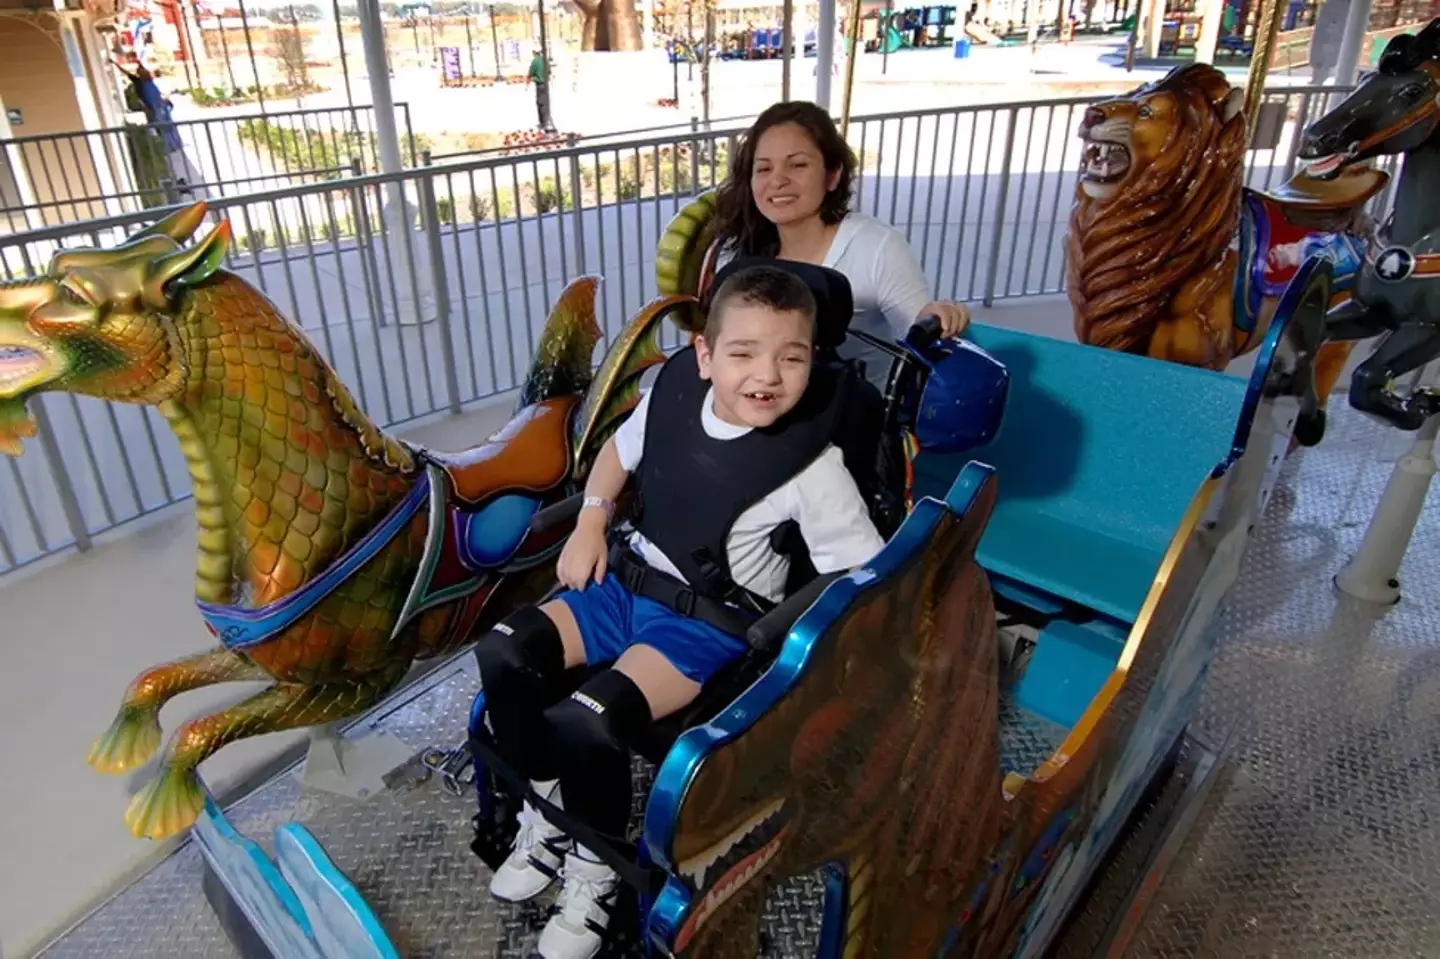 The carousel has been adapted for wheelchair users.